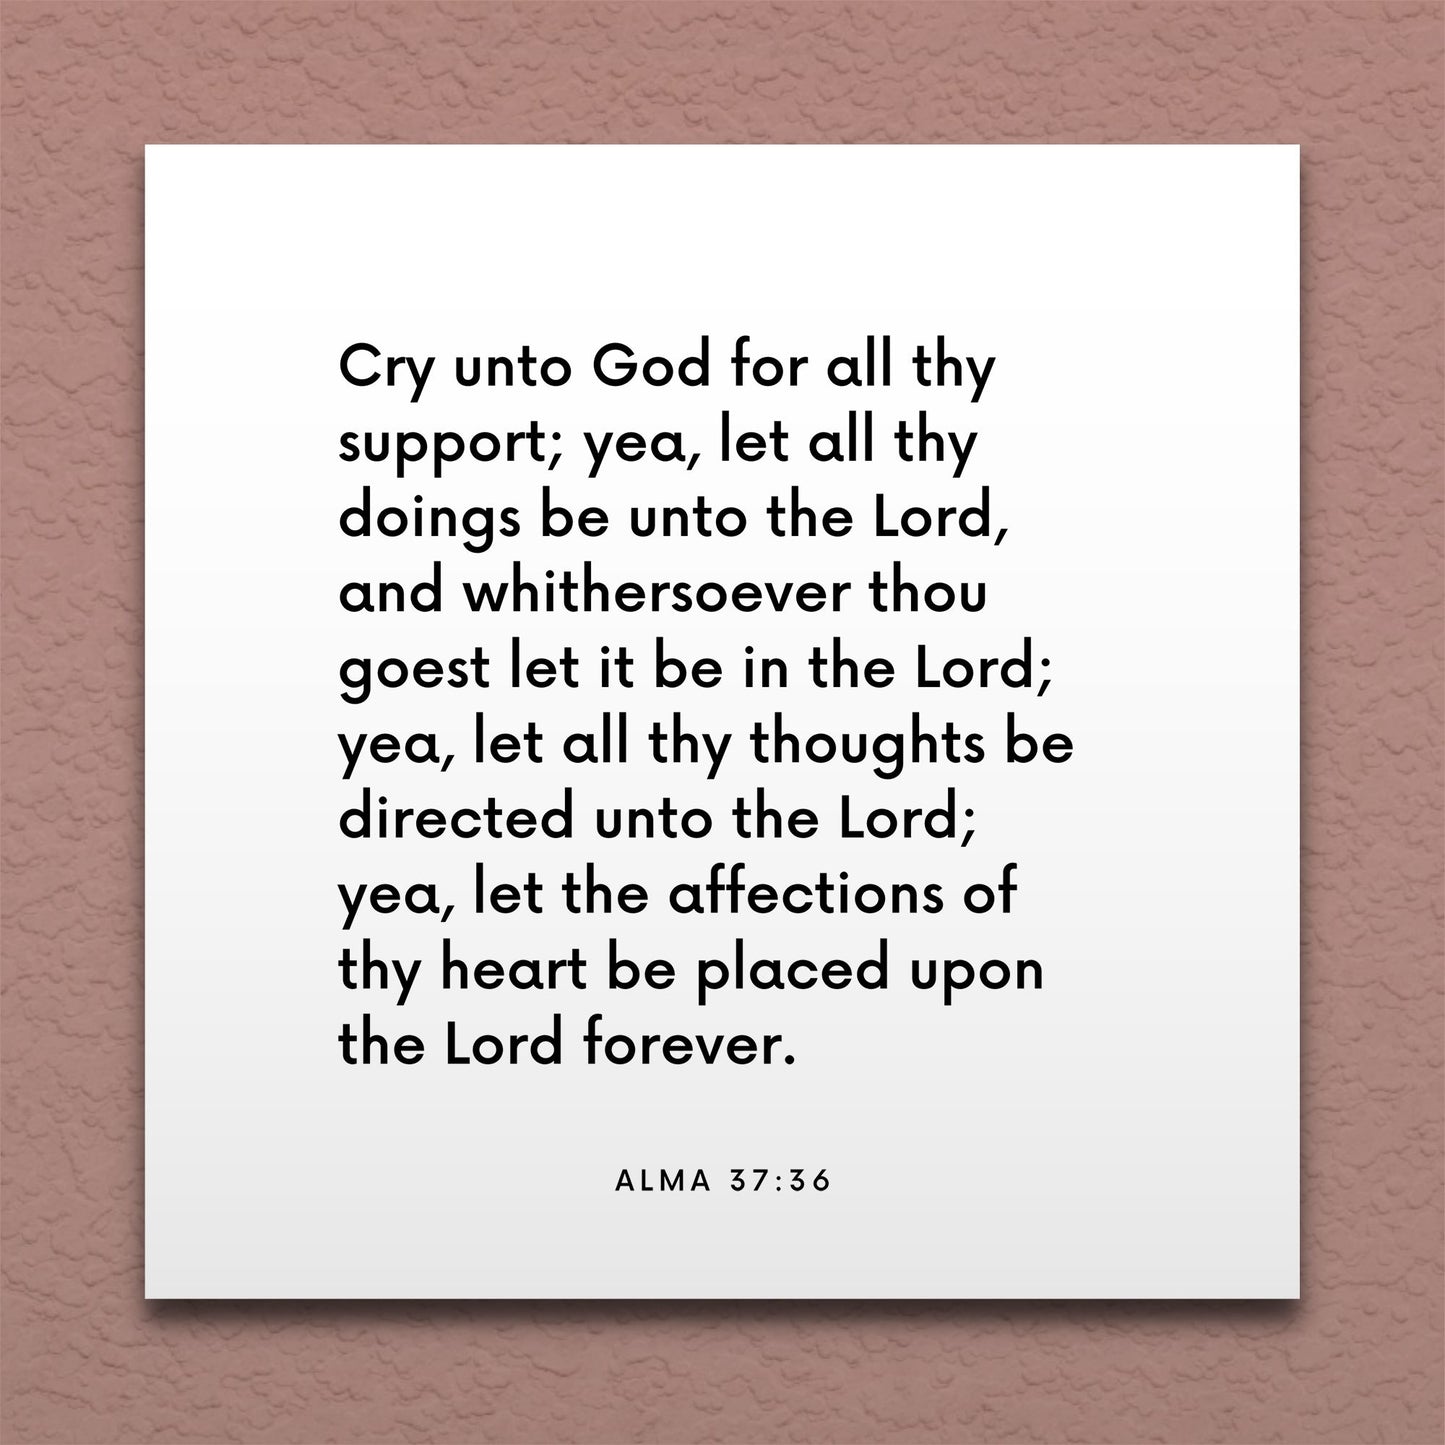 Wall-mounted scripture tile for Alma 37:36 - "Cry unto God for all thy support"